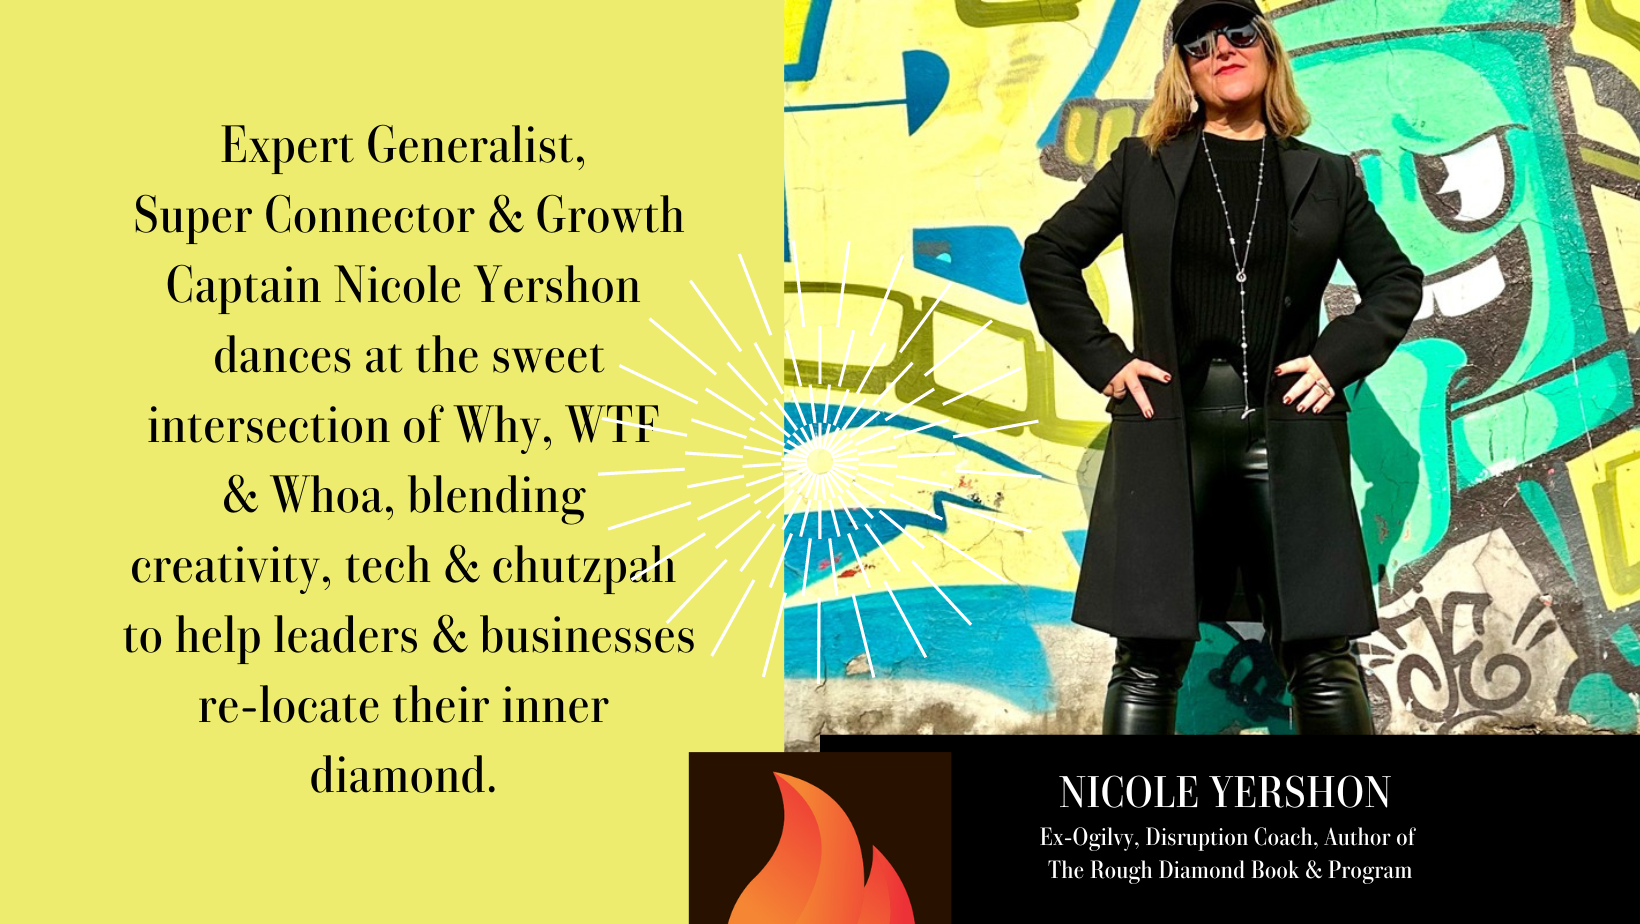 nicole-end-of-article-nicole-yershon-leadership-creativity-disruption-mentor-college-business-transformation-growh-creativity.png